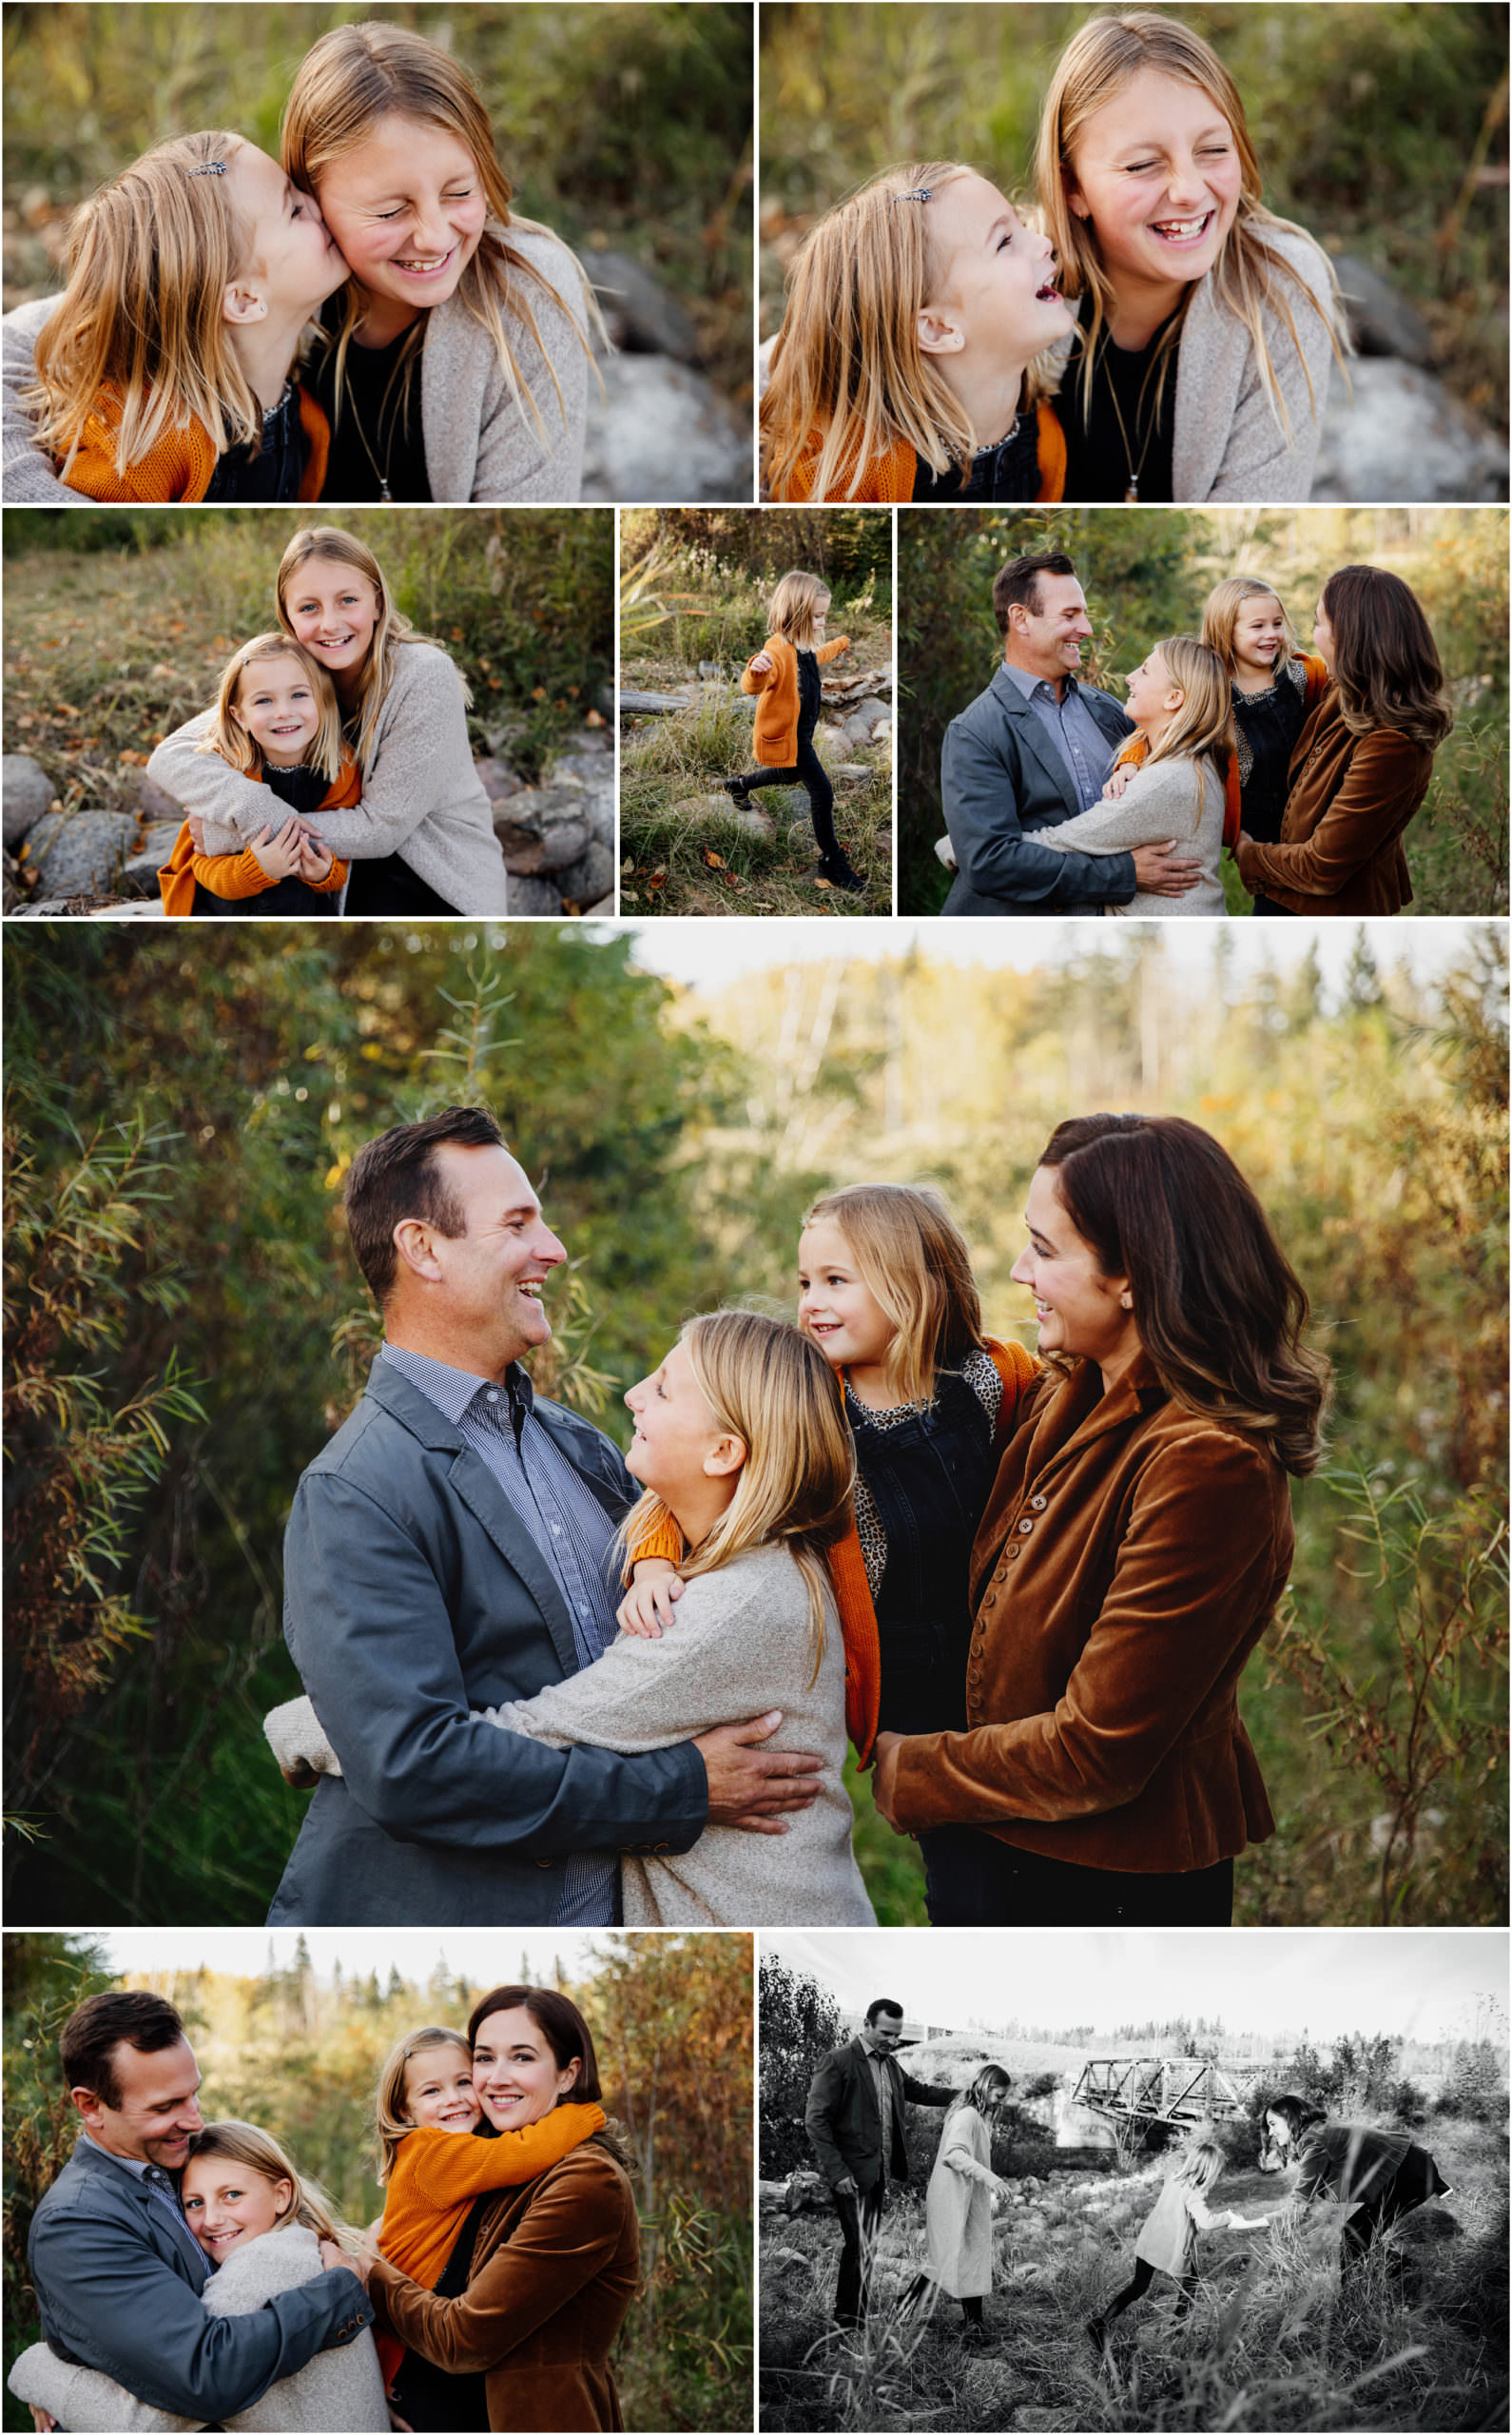 Outdoor Fall Edmonton Family Photography Session